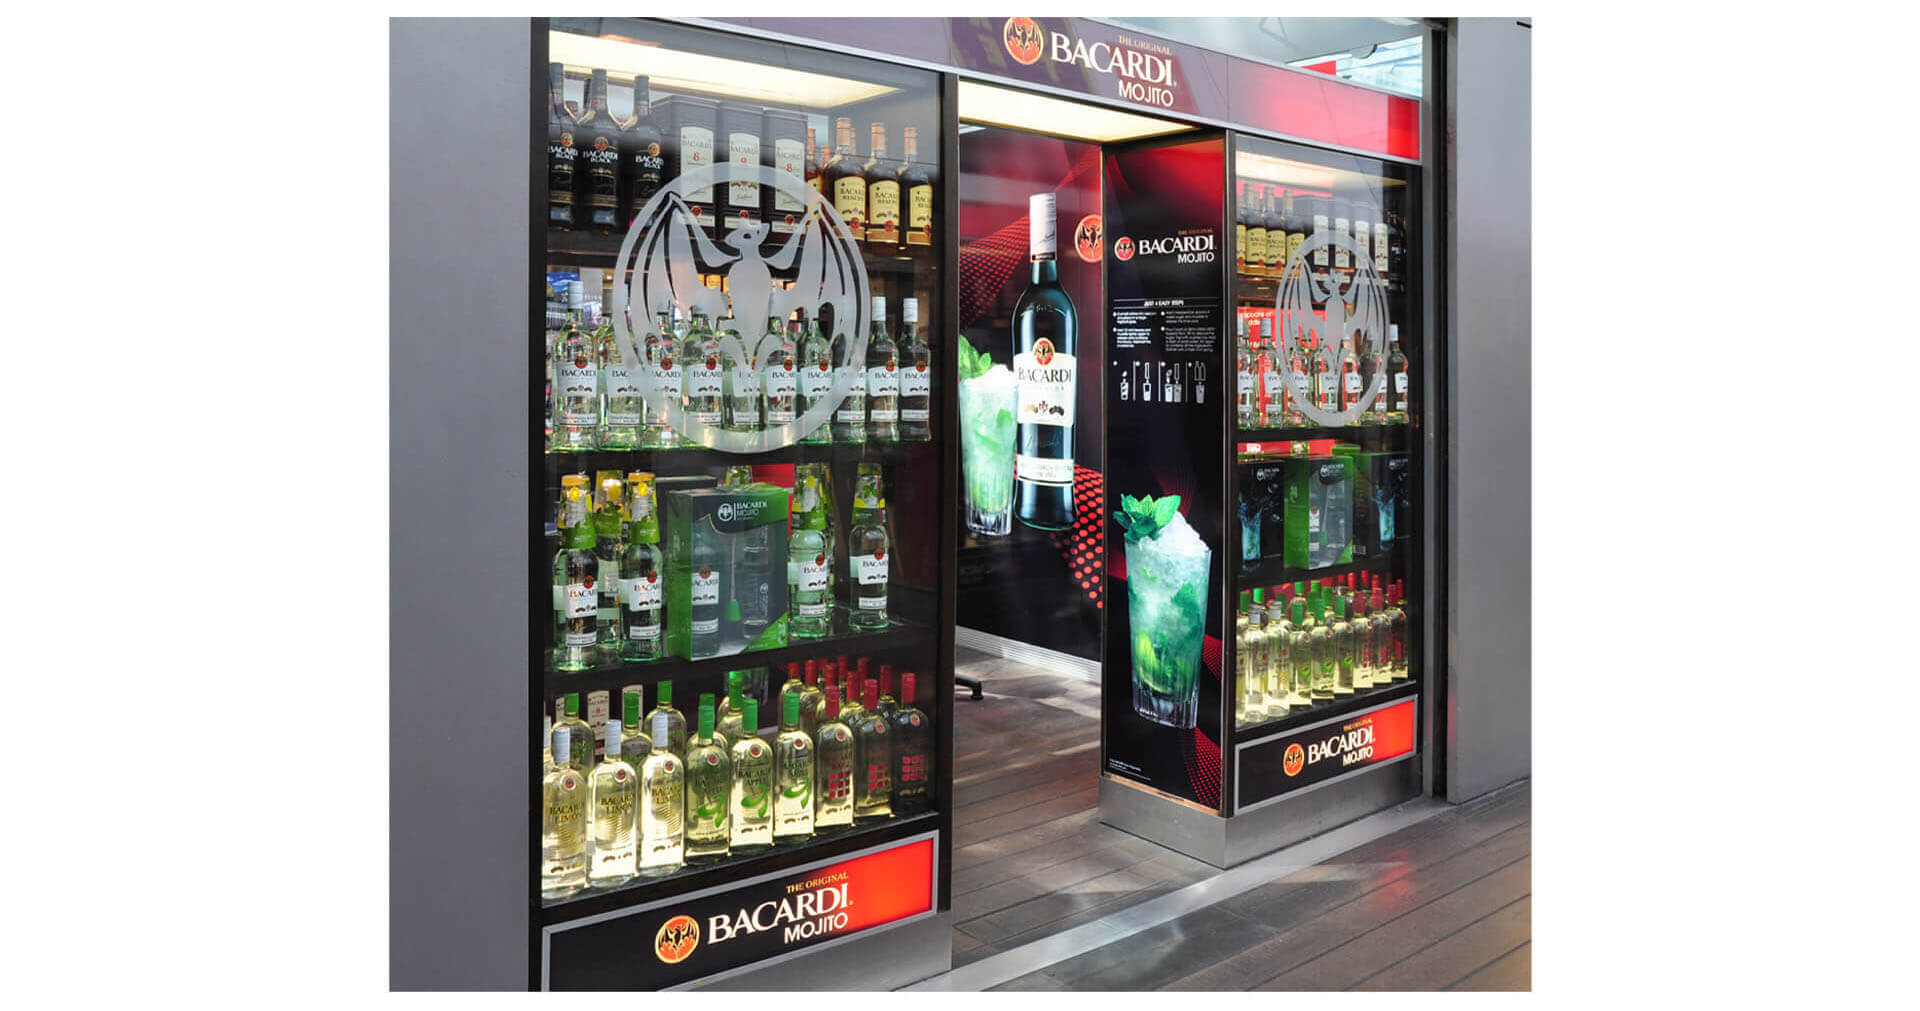 Bacardi Mojito Global Travel Retail, brand activation store entrance design at Charles de Gualle Airport